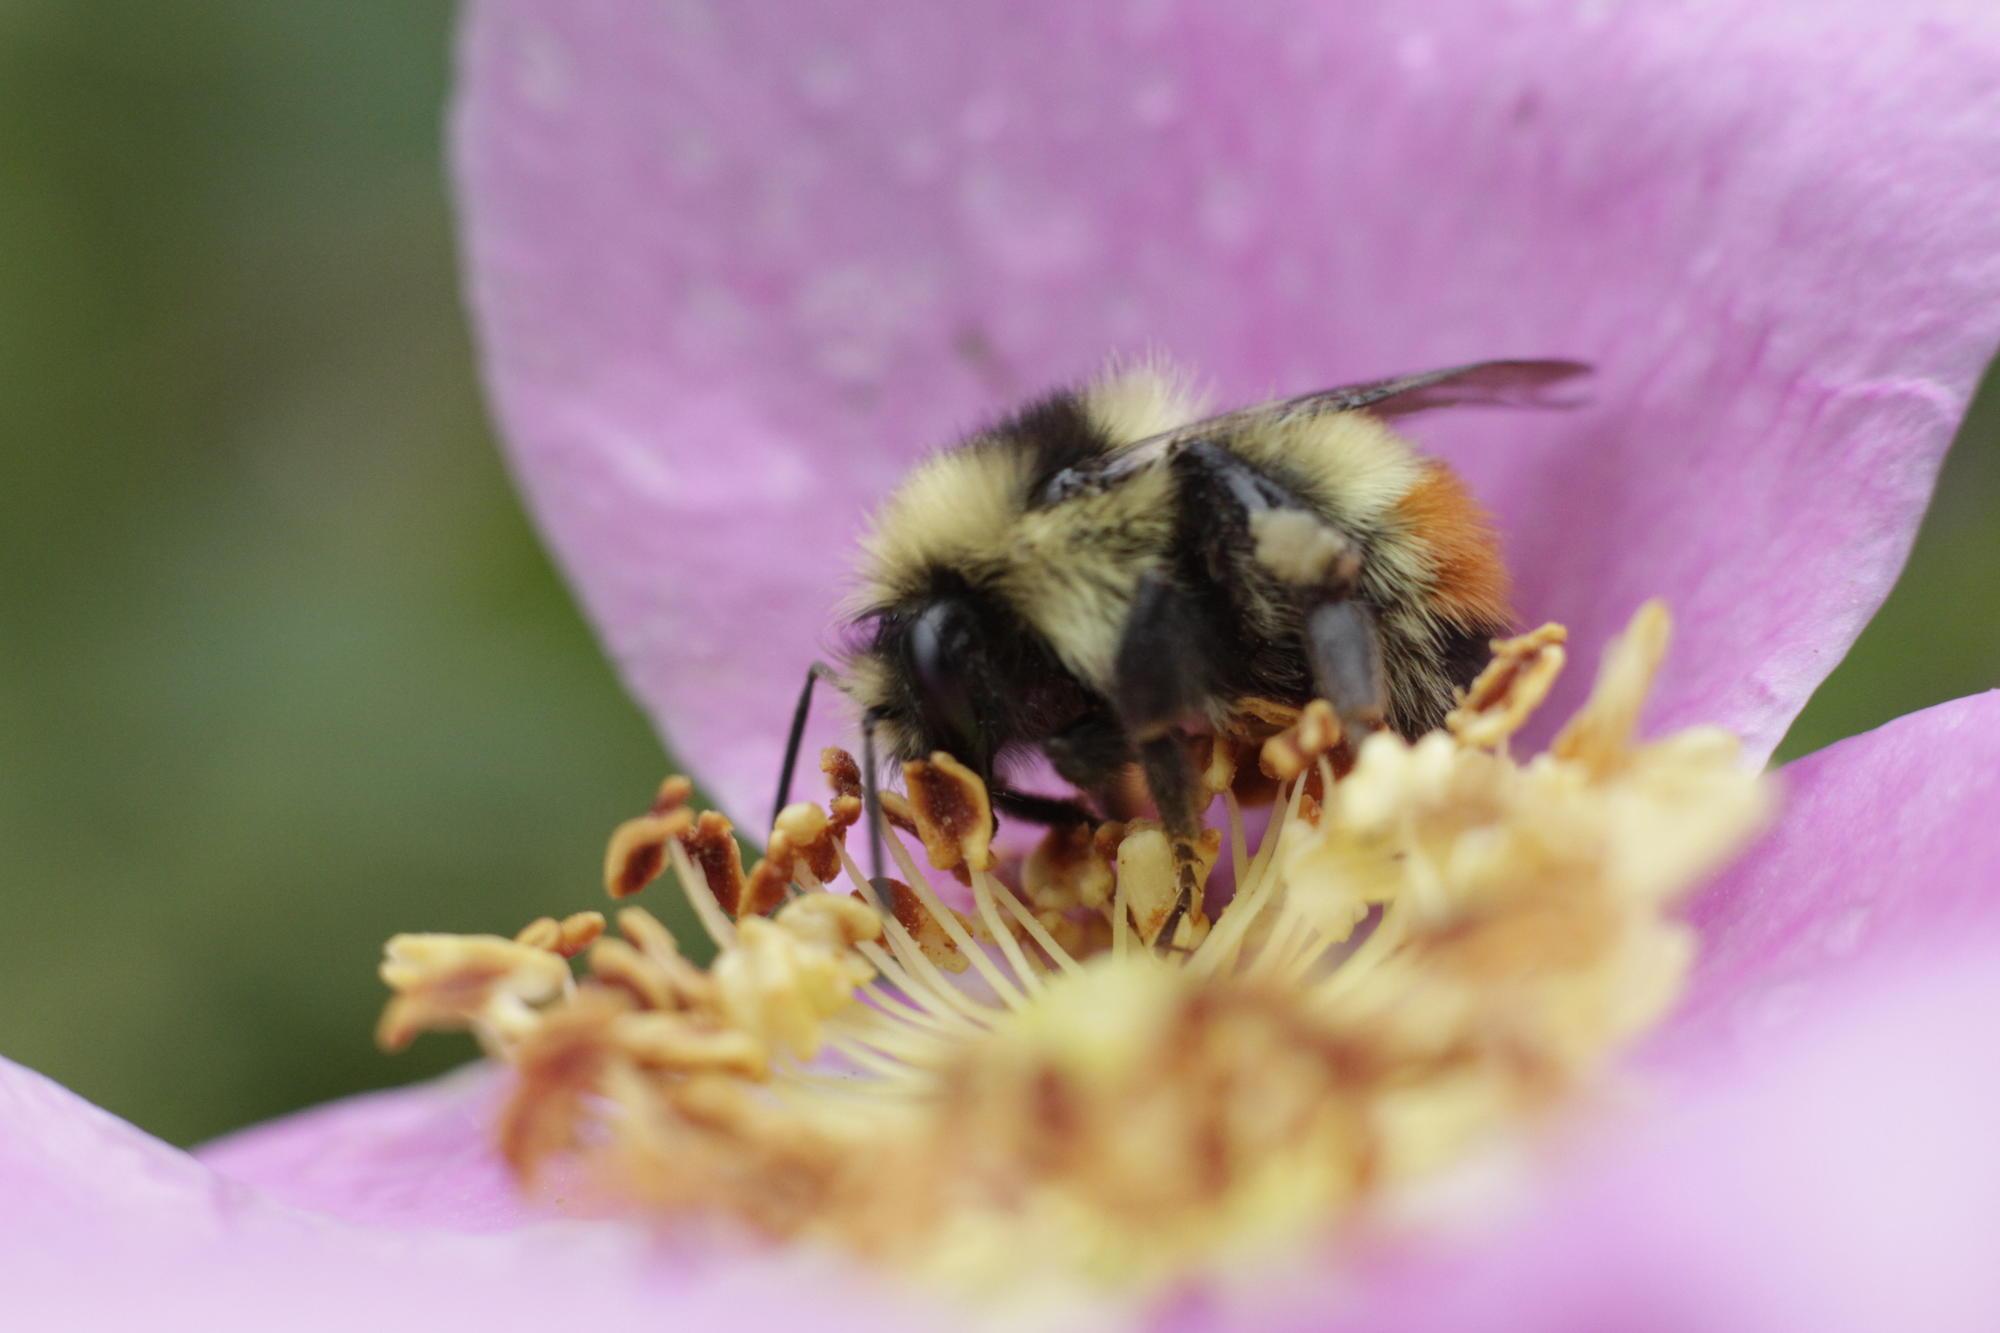 bumble bee foraging on stamens of pink rose